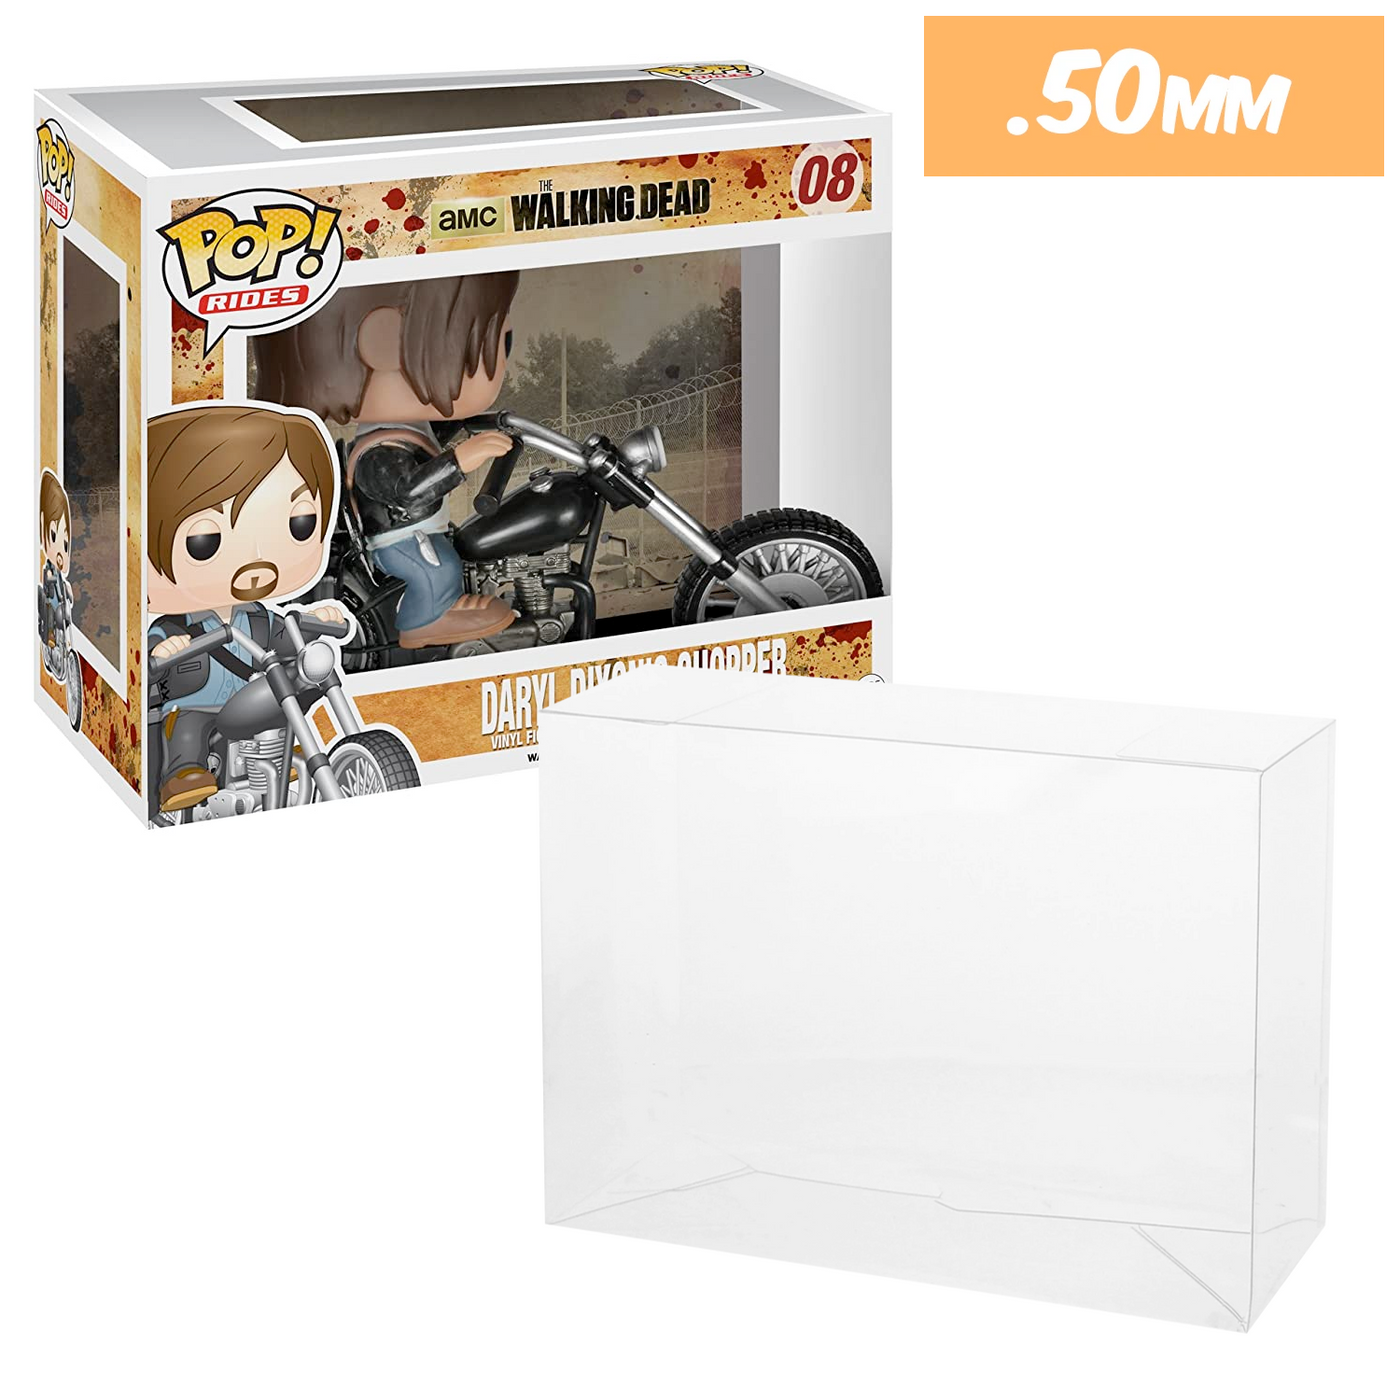 Daryl Dixon Chopper bike motorcycle pop rides best funko pop protectors thick strong uv scratch flat top stack vinyl display geek plastic shield vaulted eco armor fits collect protect display case kollector protector